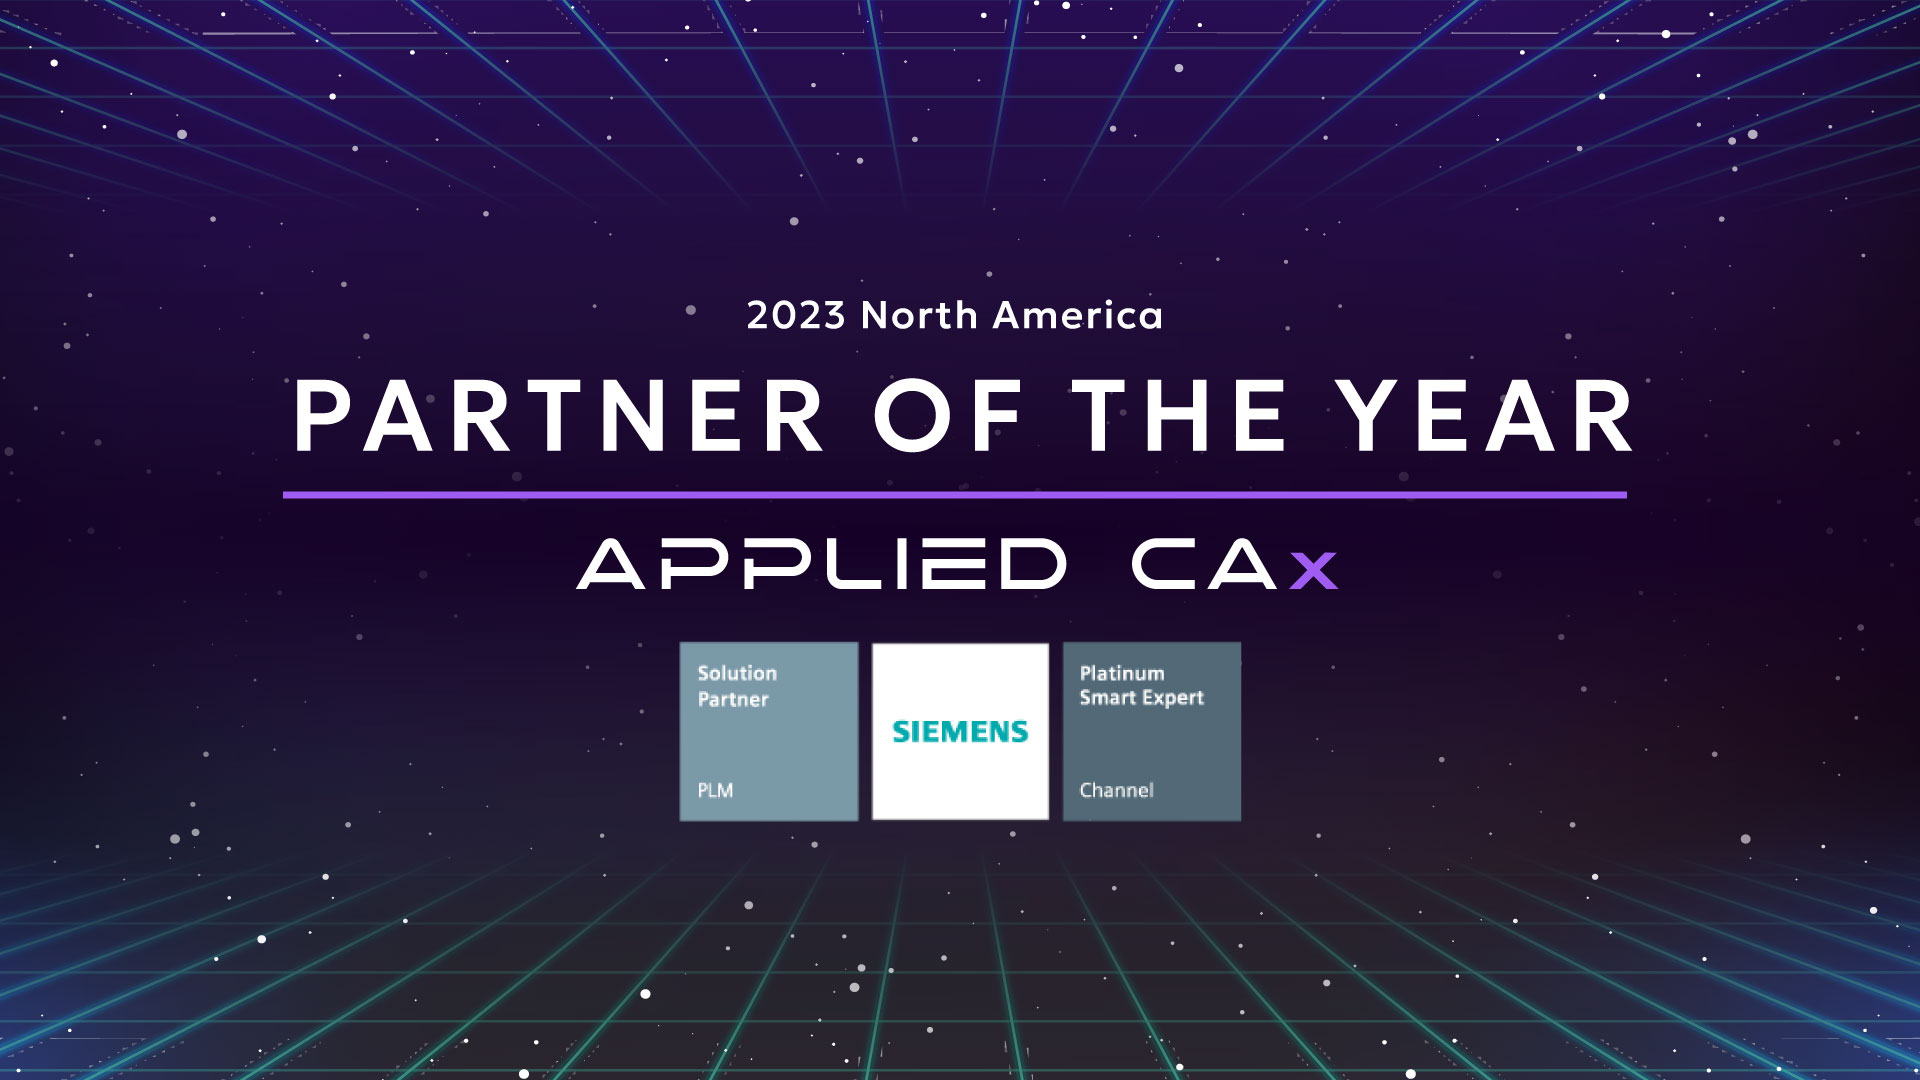 Applied CAx Awarded 2023 Siemens Partner of the Year